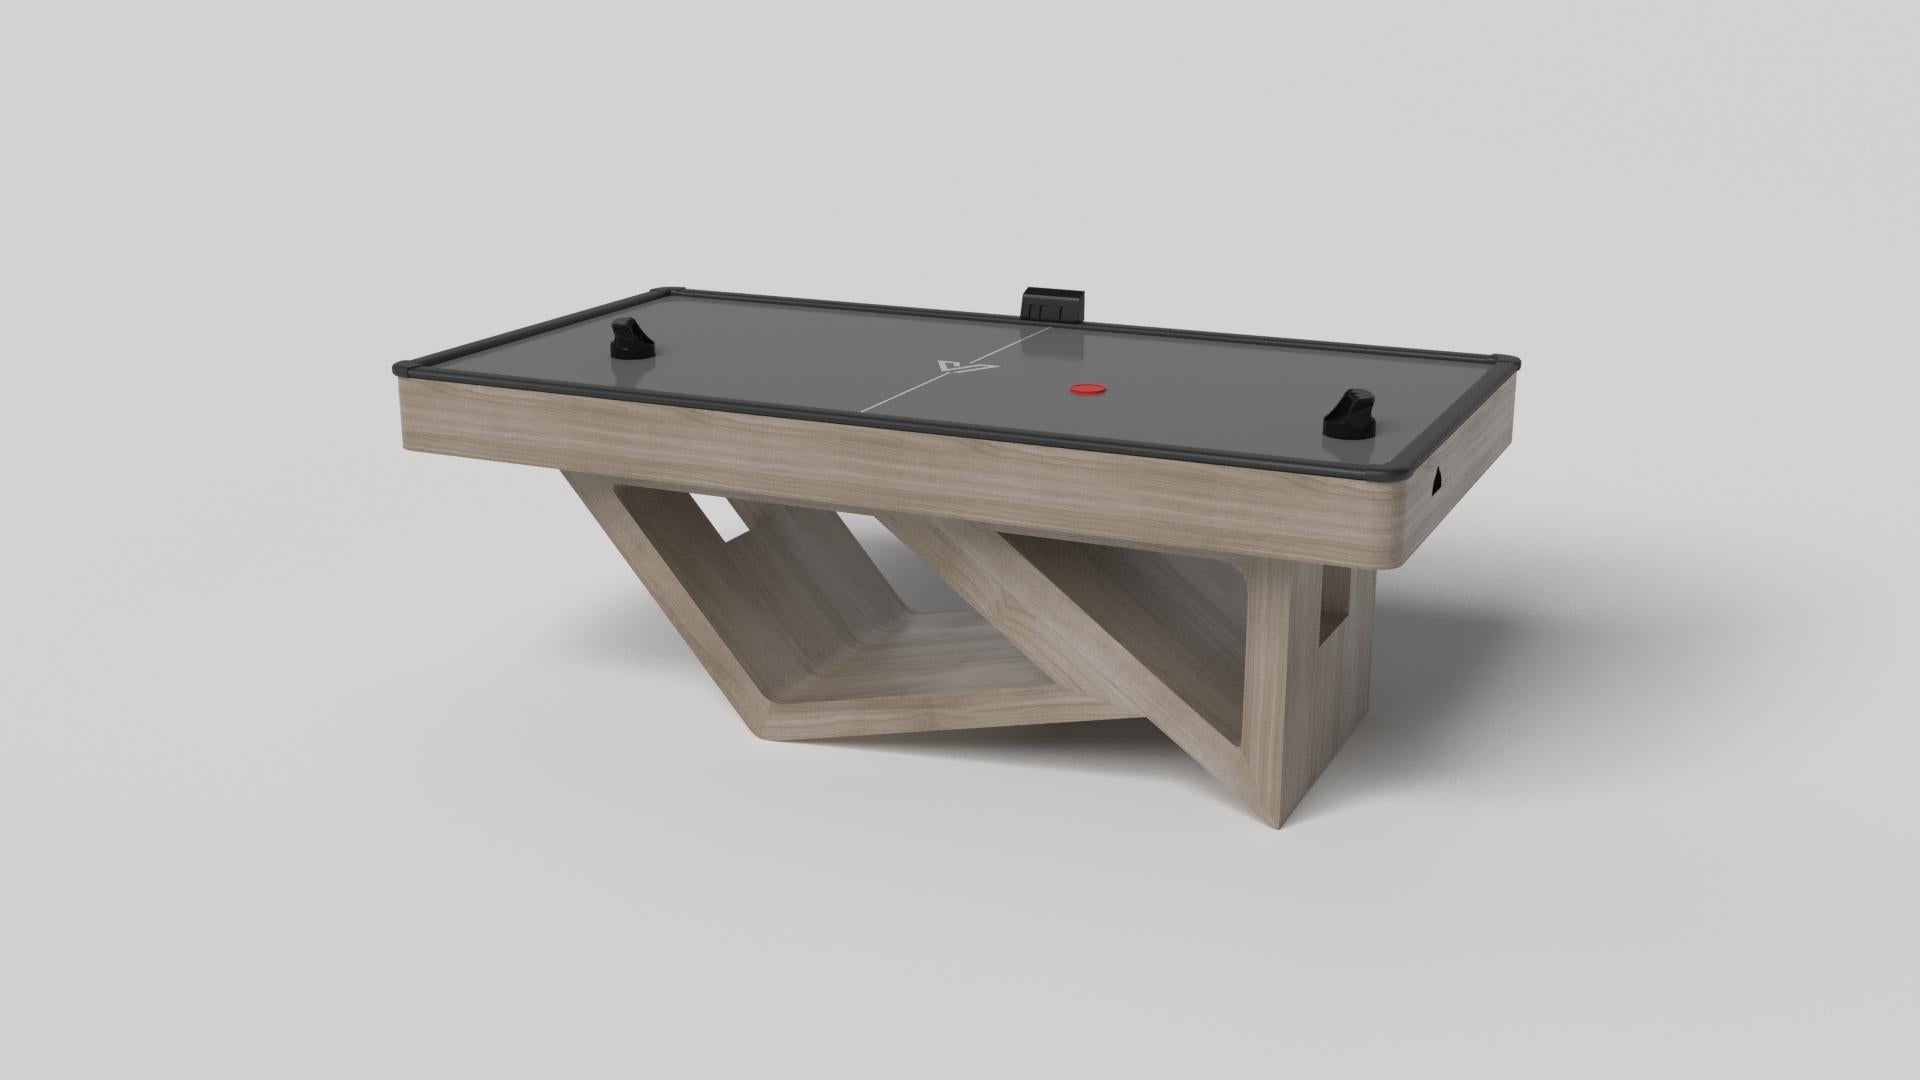 Drawing inspiration from the beauty of geometric forms, the Rumba air hockey table in brushed aluminum is characterized by a series of hollow and solid shapes that form an offset asymmetric base. Accented with a black top for professional game play,